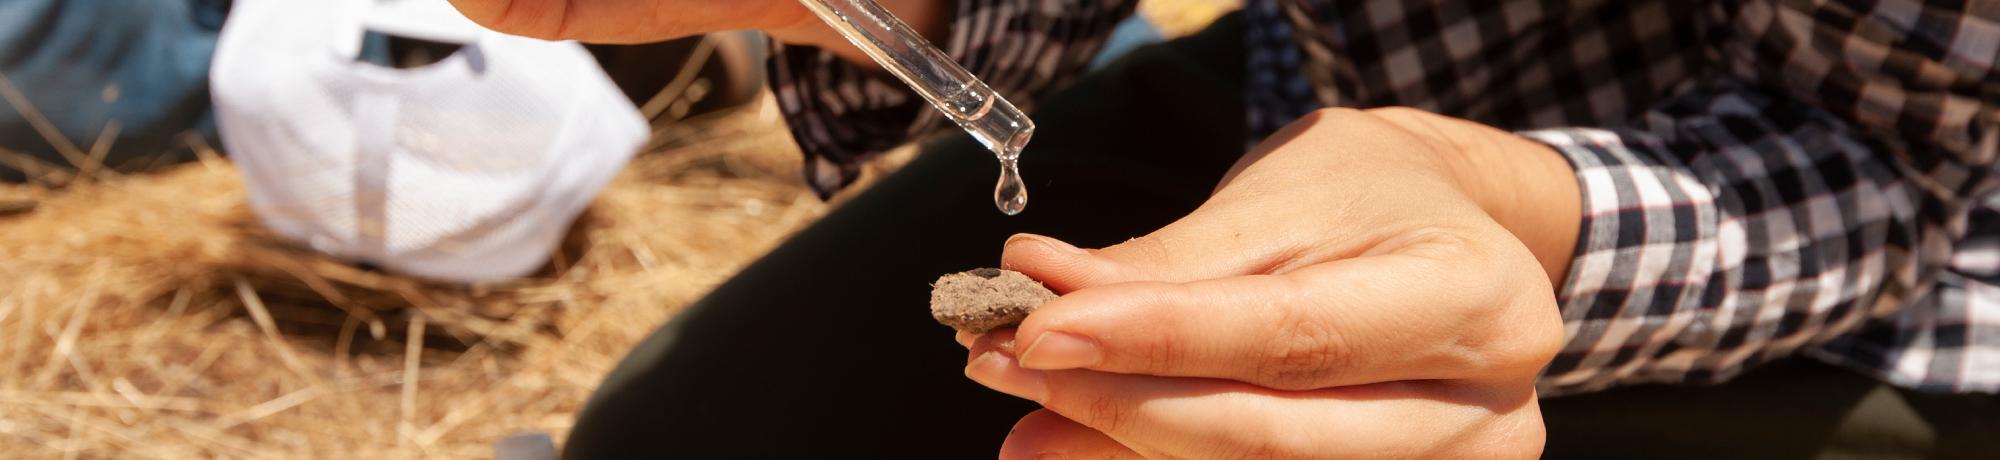 A drop of water is added to a dry piece of soil for testing.